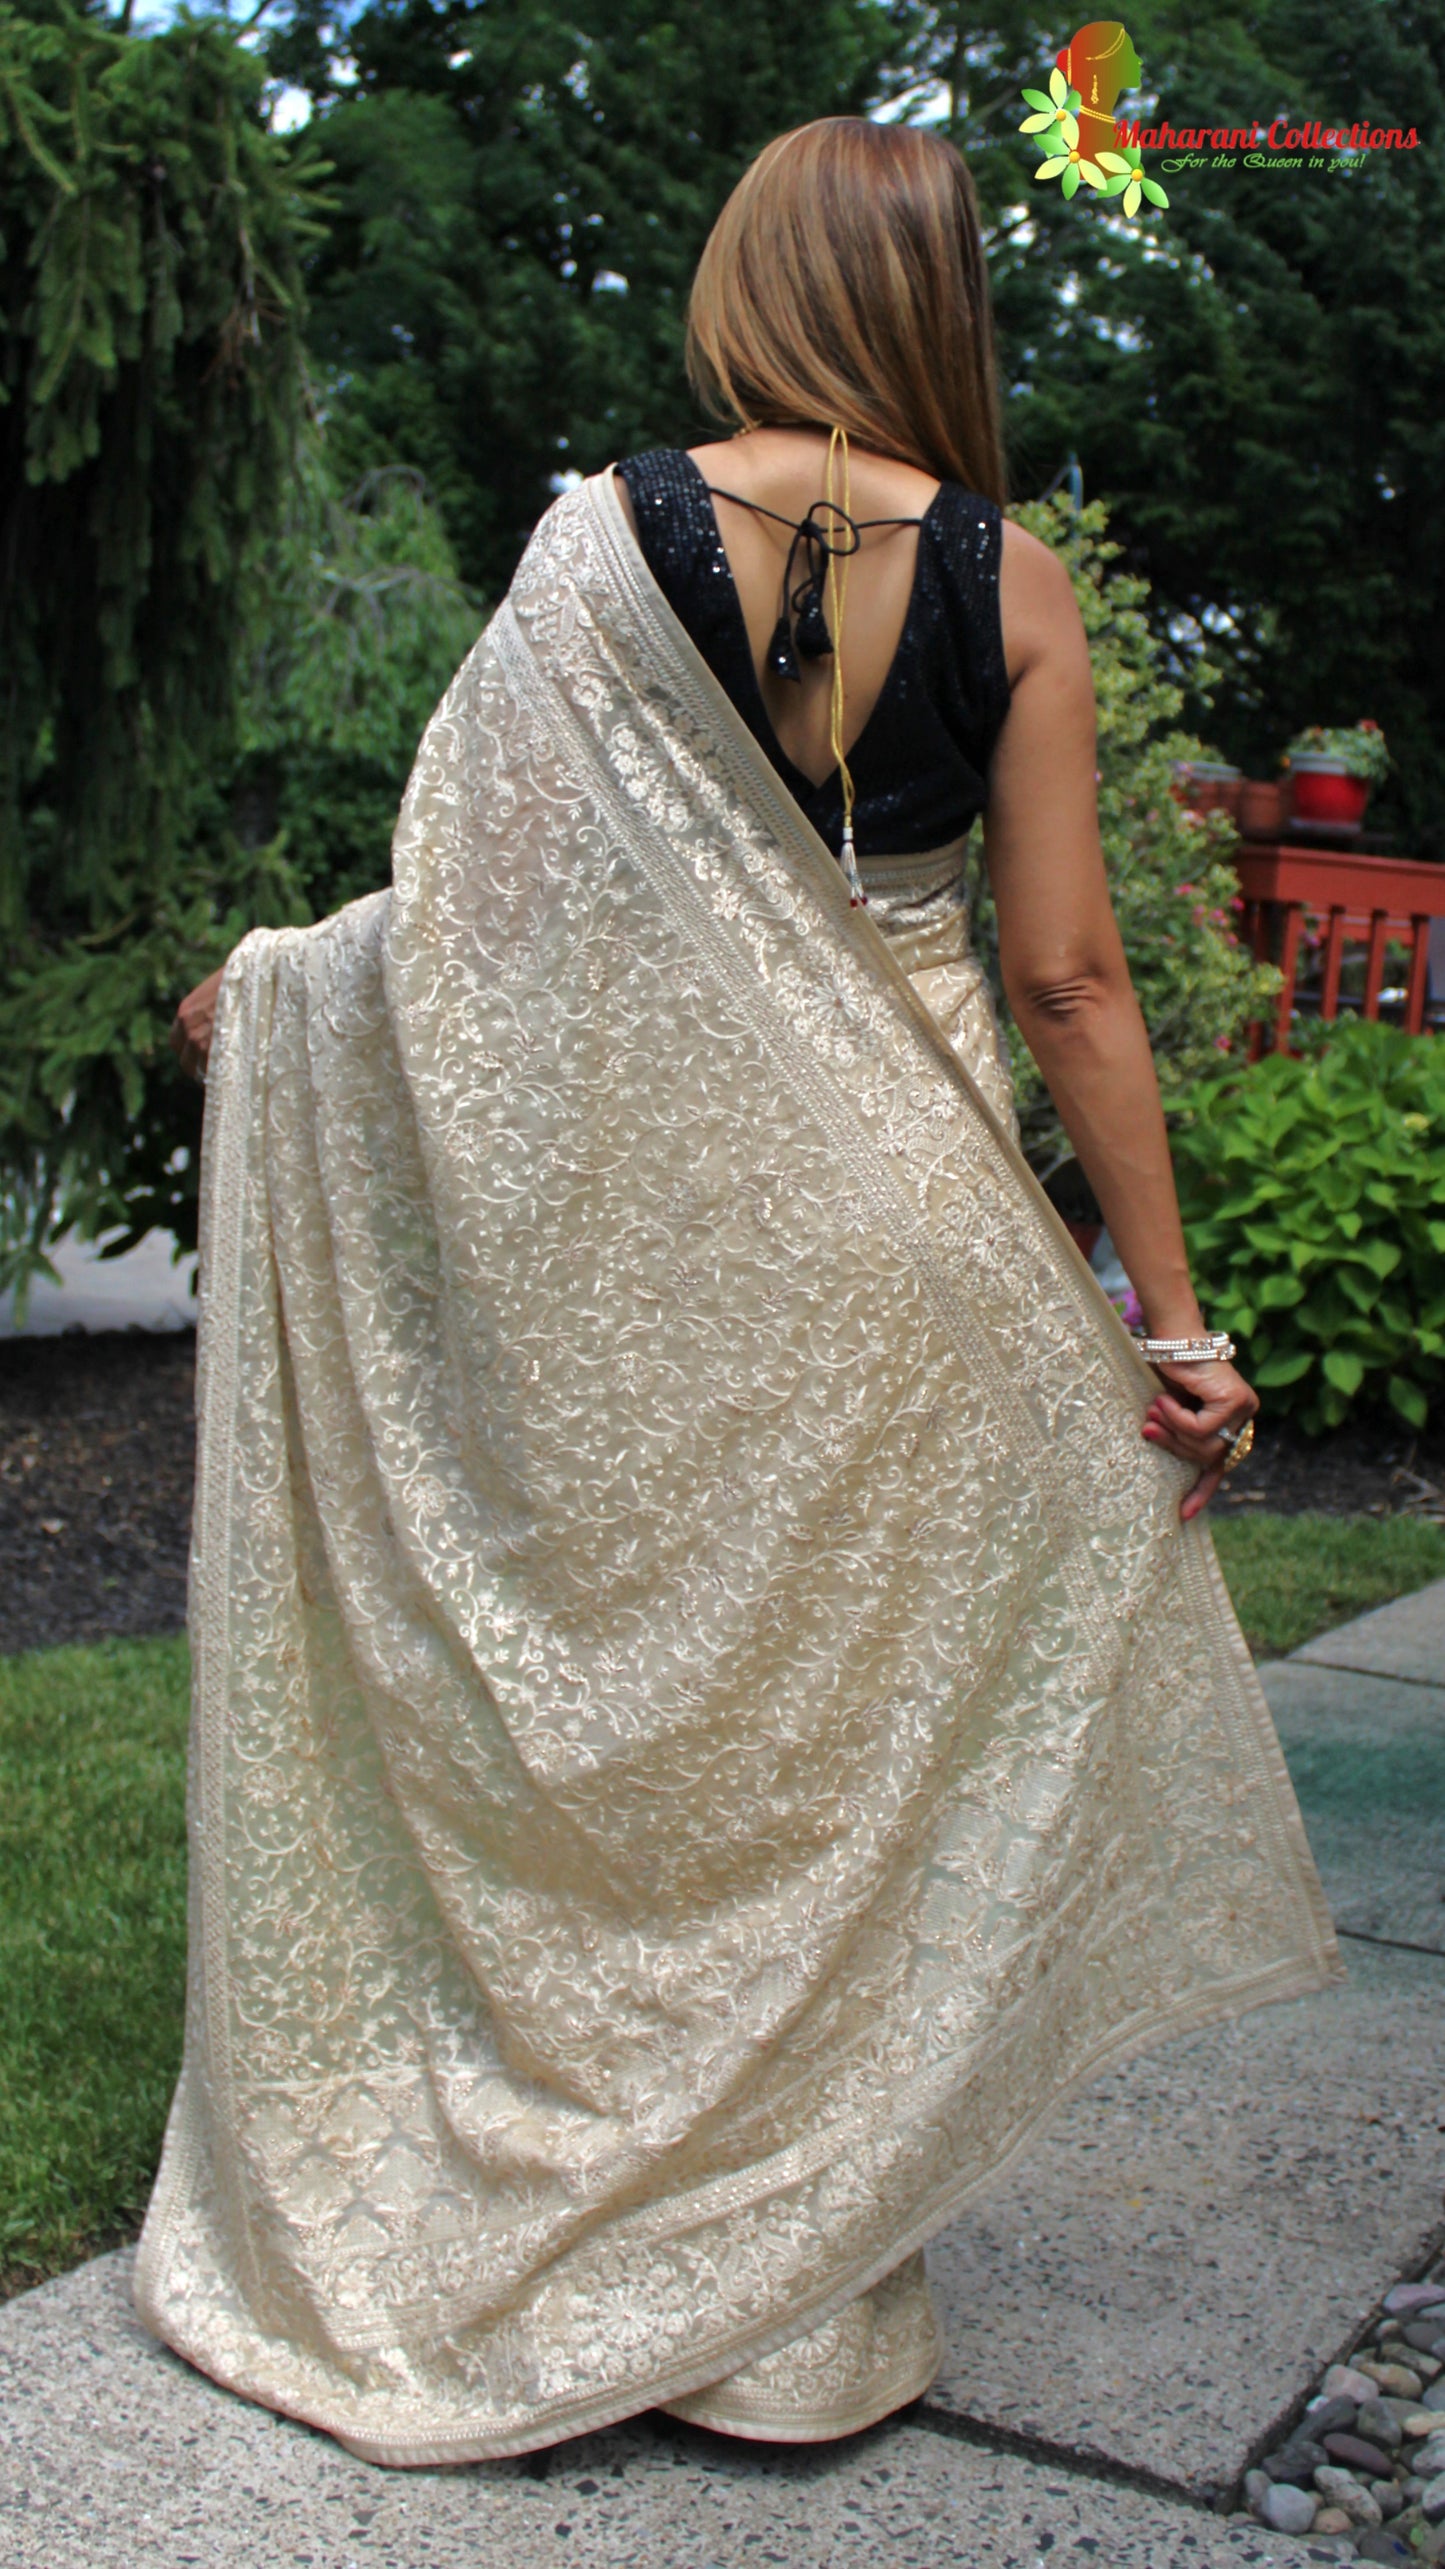 Maharani's Party Wear Georgette Heavy Zari Saree - Beige (with Stitched Blouse and Petticoat)